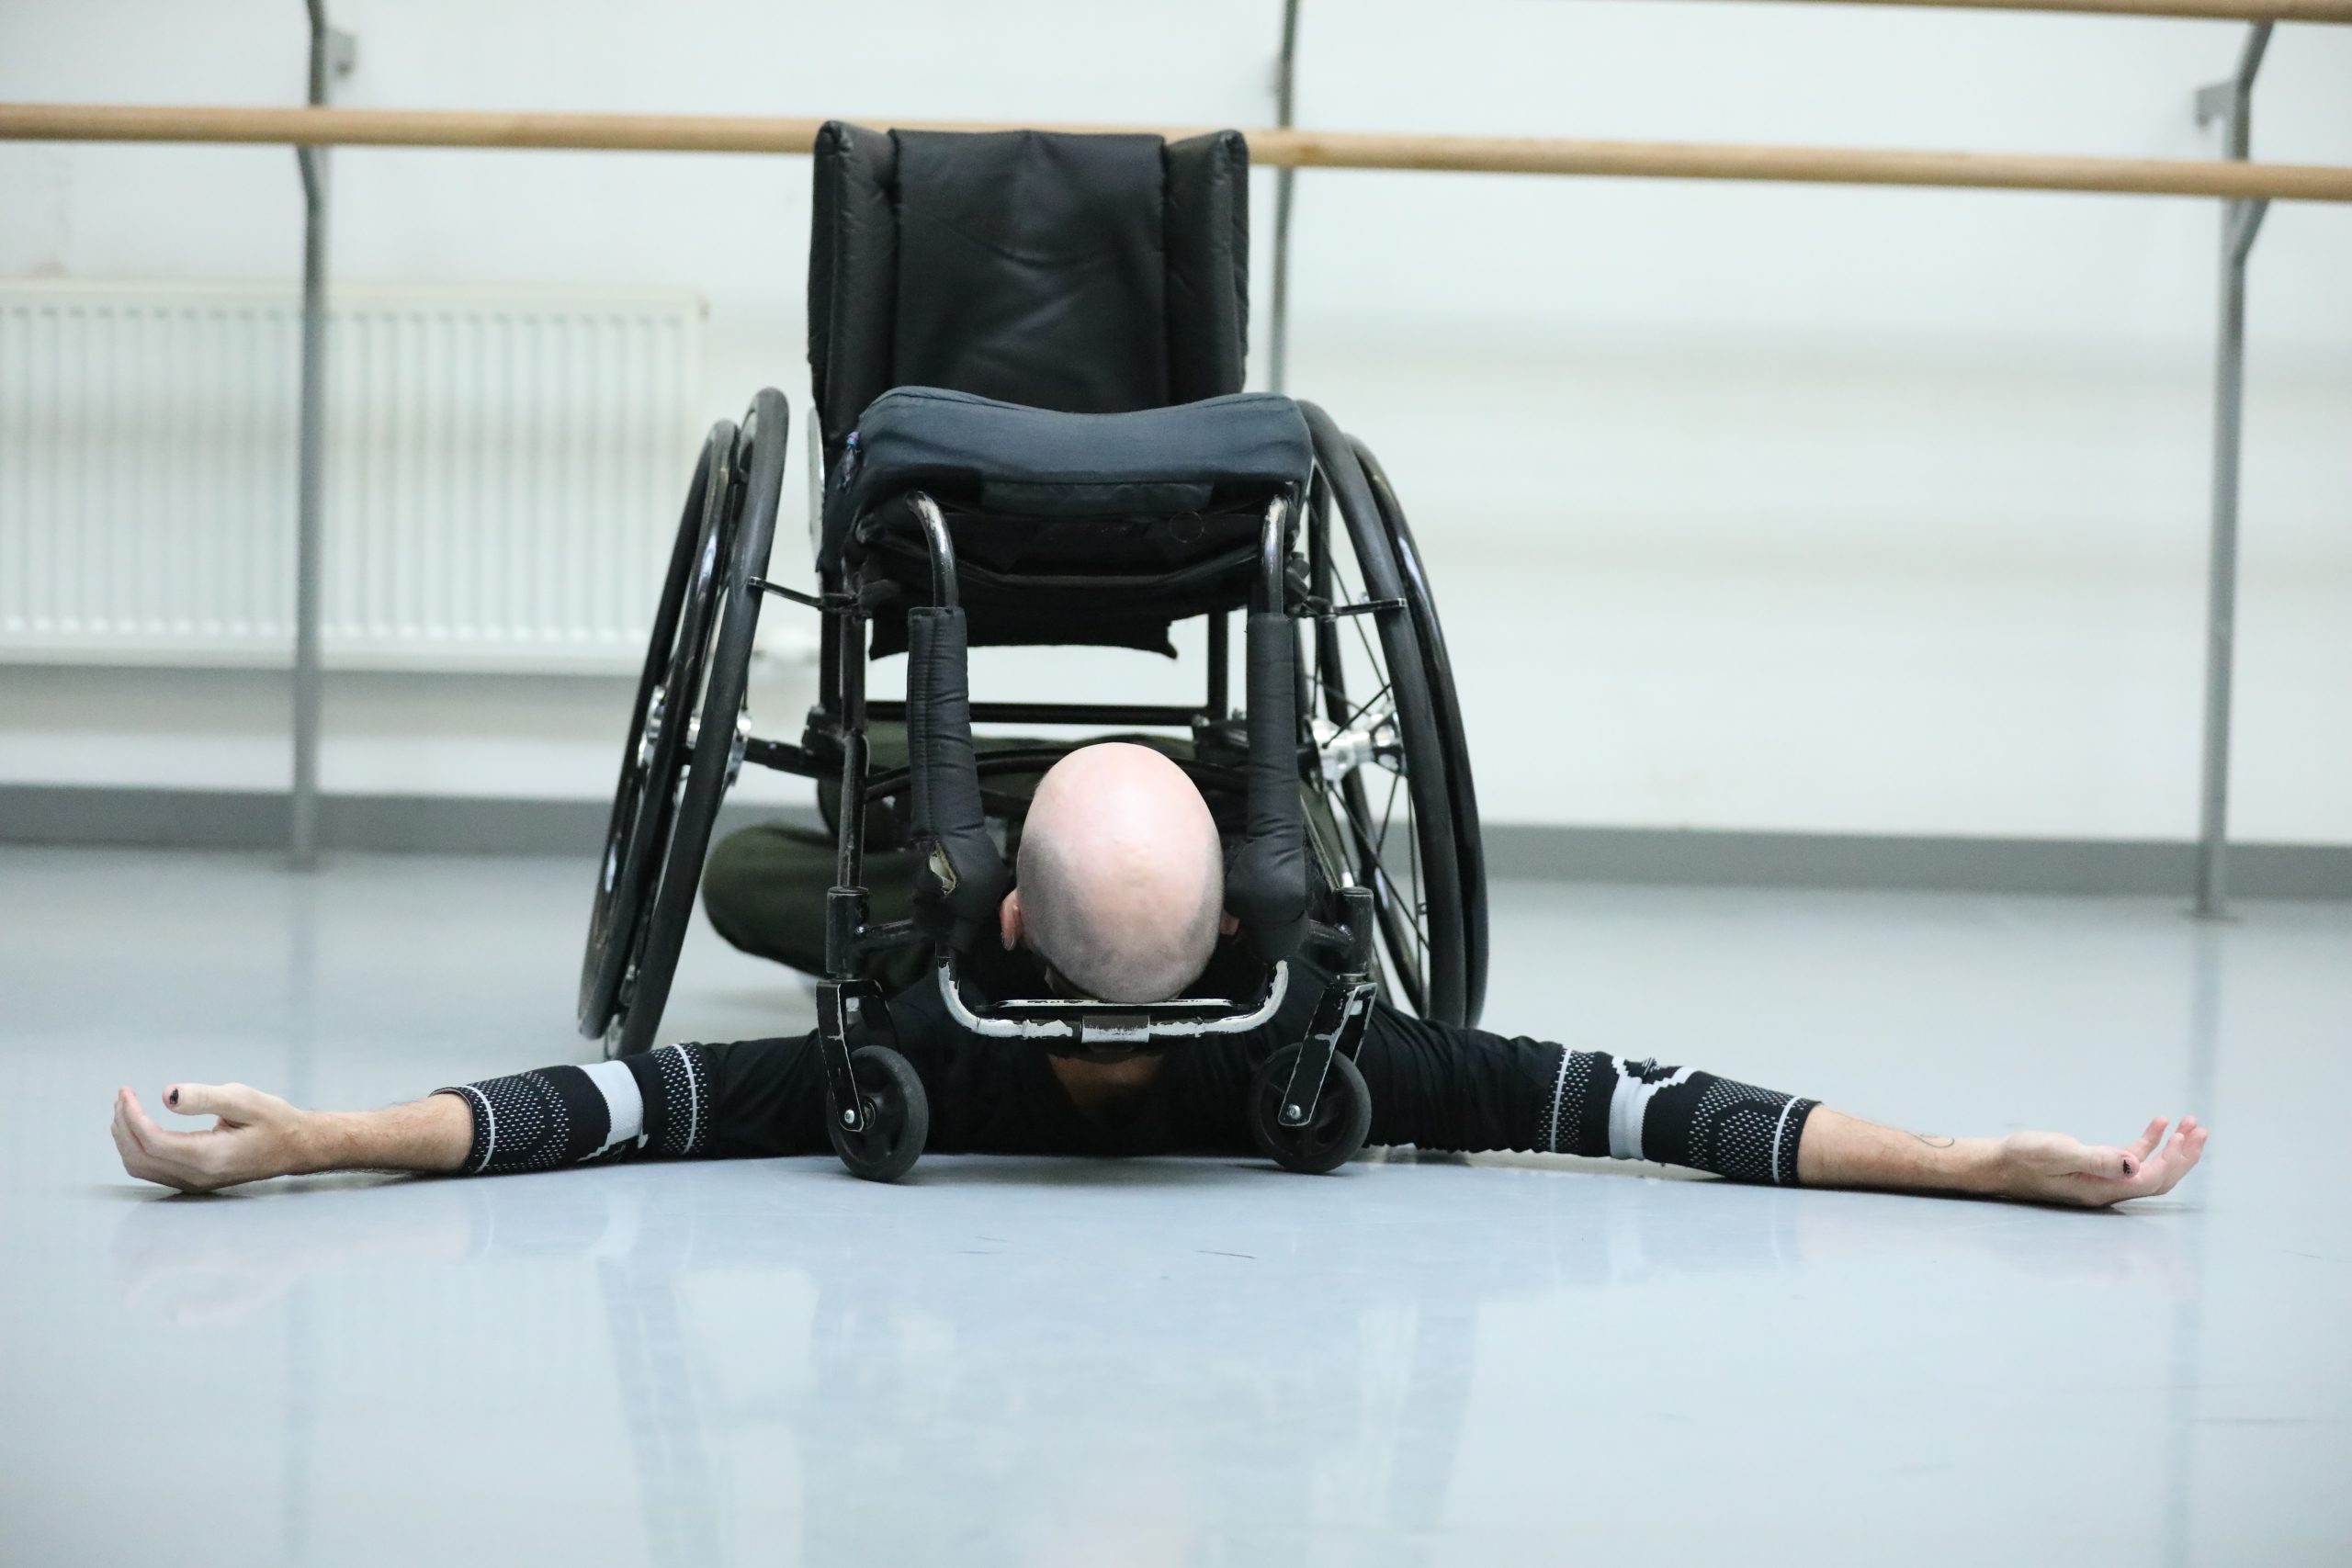 In a dance studio, Marc is laid flat on the floor, his arms stretched out above his head. His wheelchair sits on top of him, trapping his head between the footrest and his arms between the wheels.